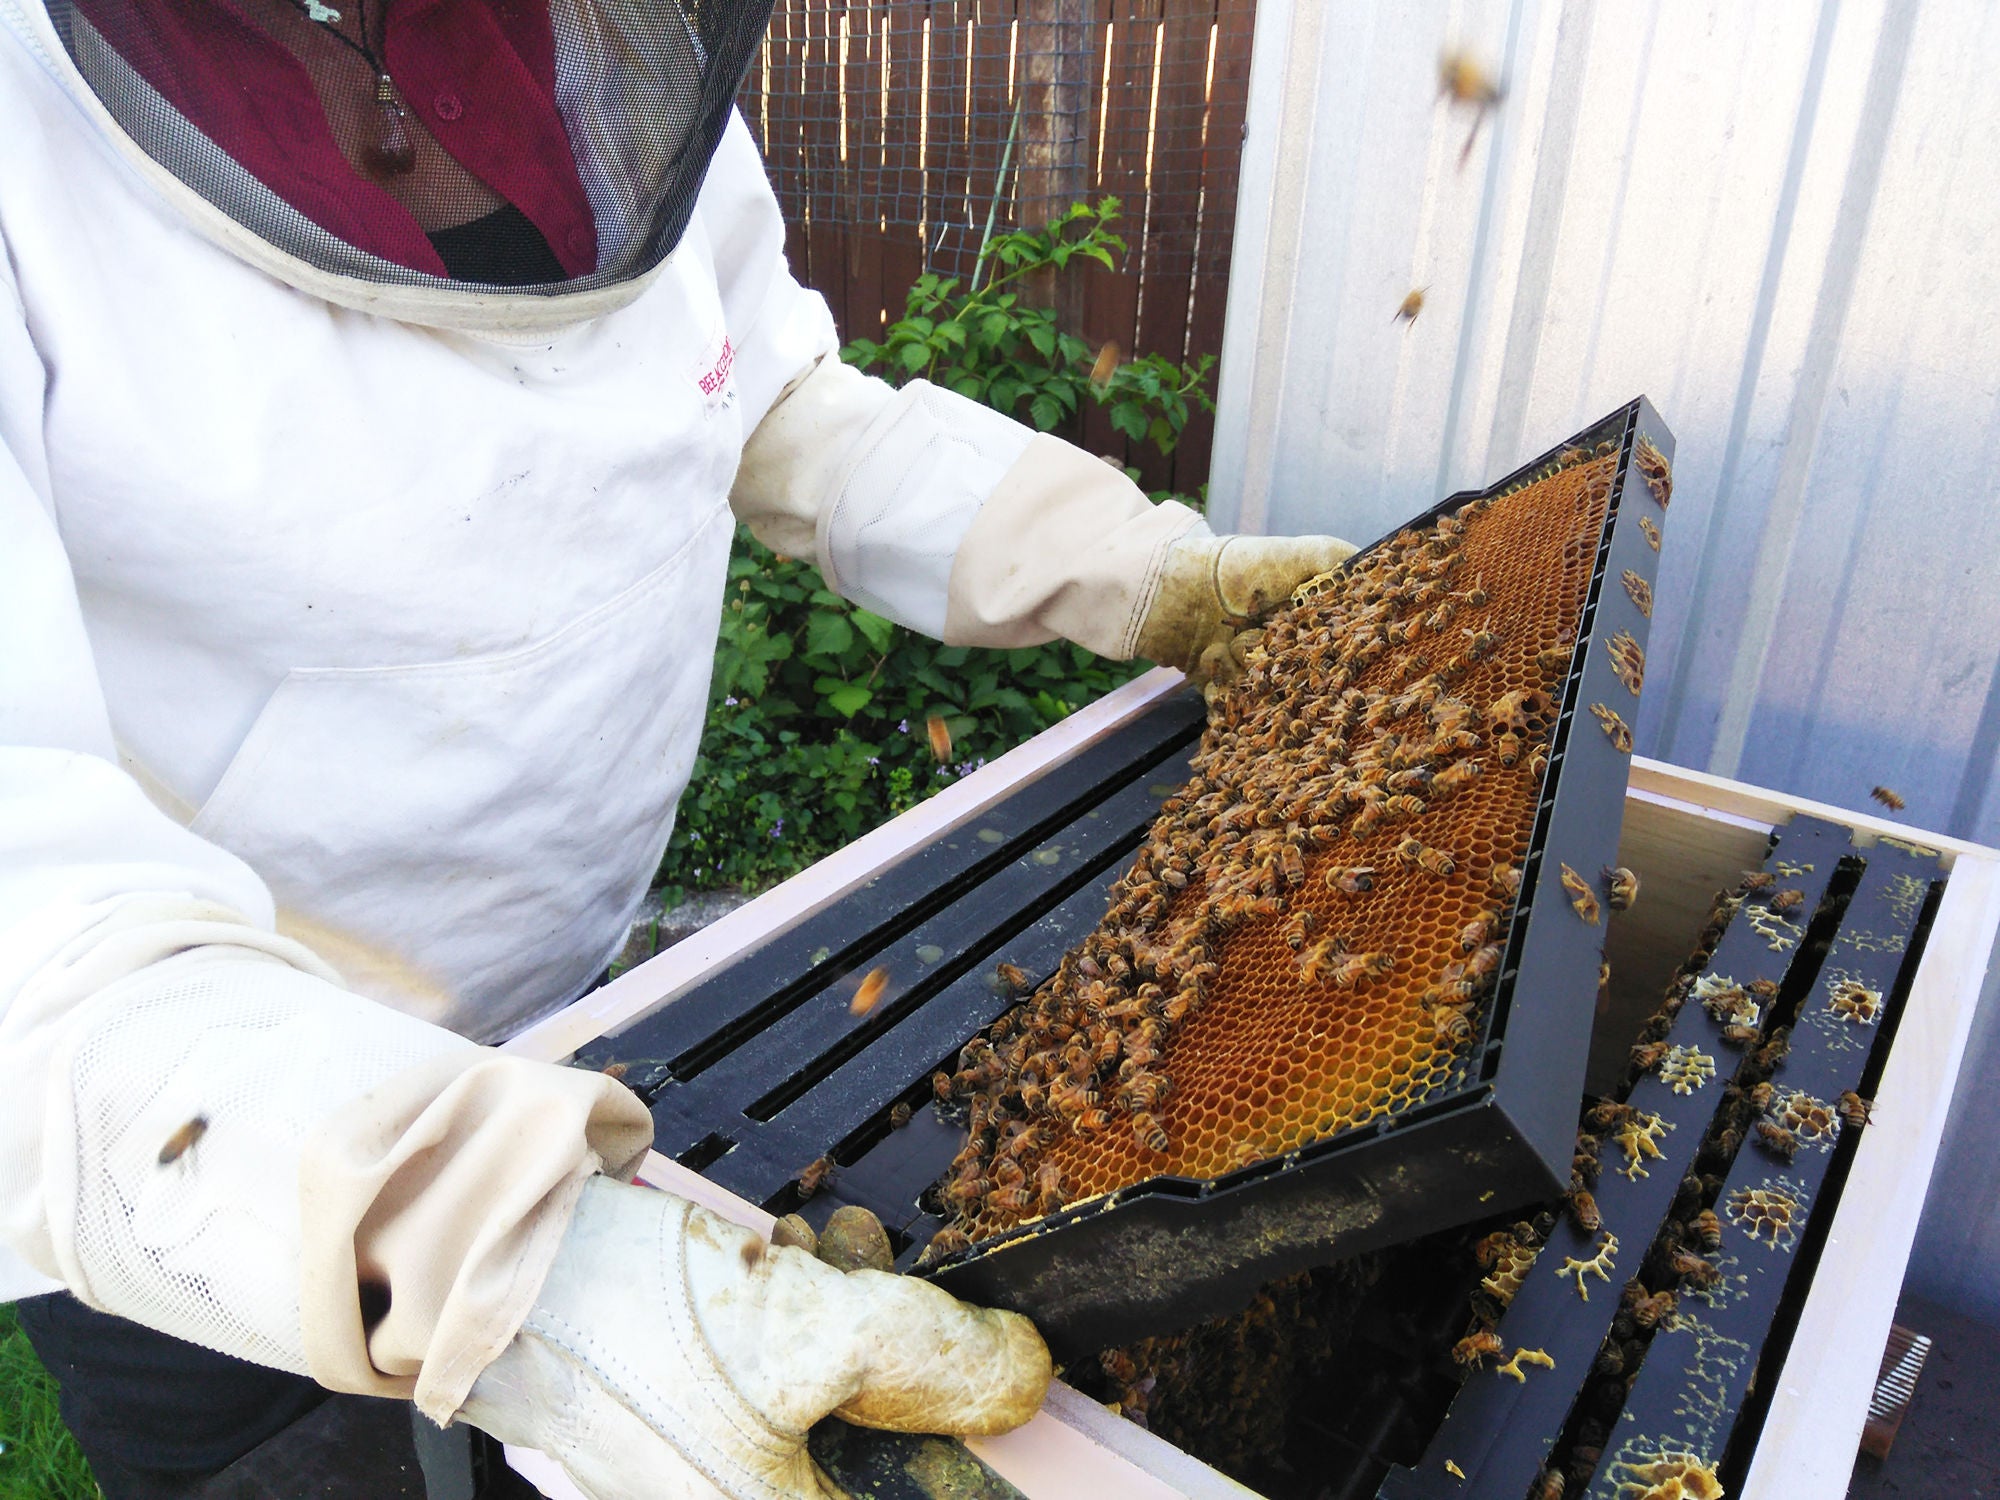 Preparation, placement, patience – safe beekeeping practices